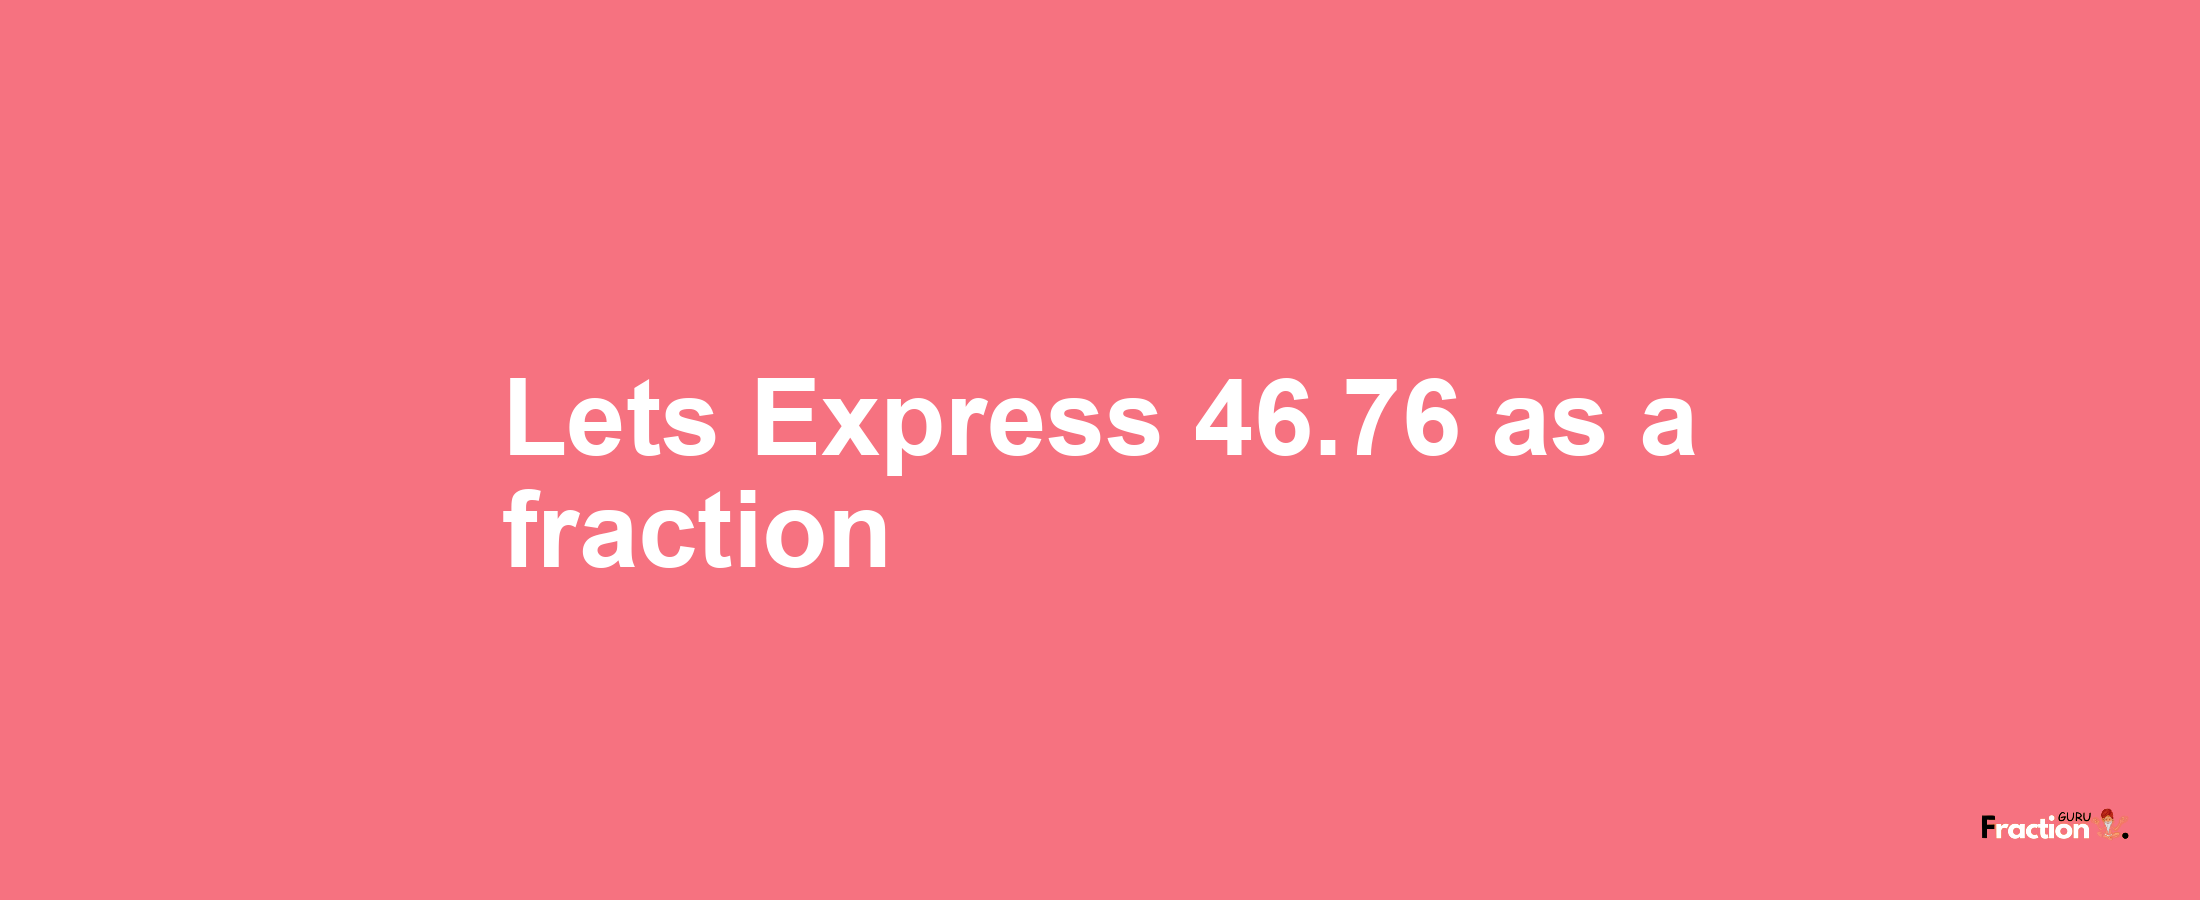 Lets Express 46.76 as afraction